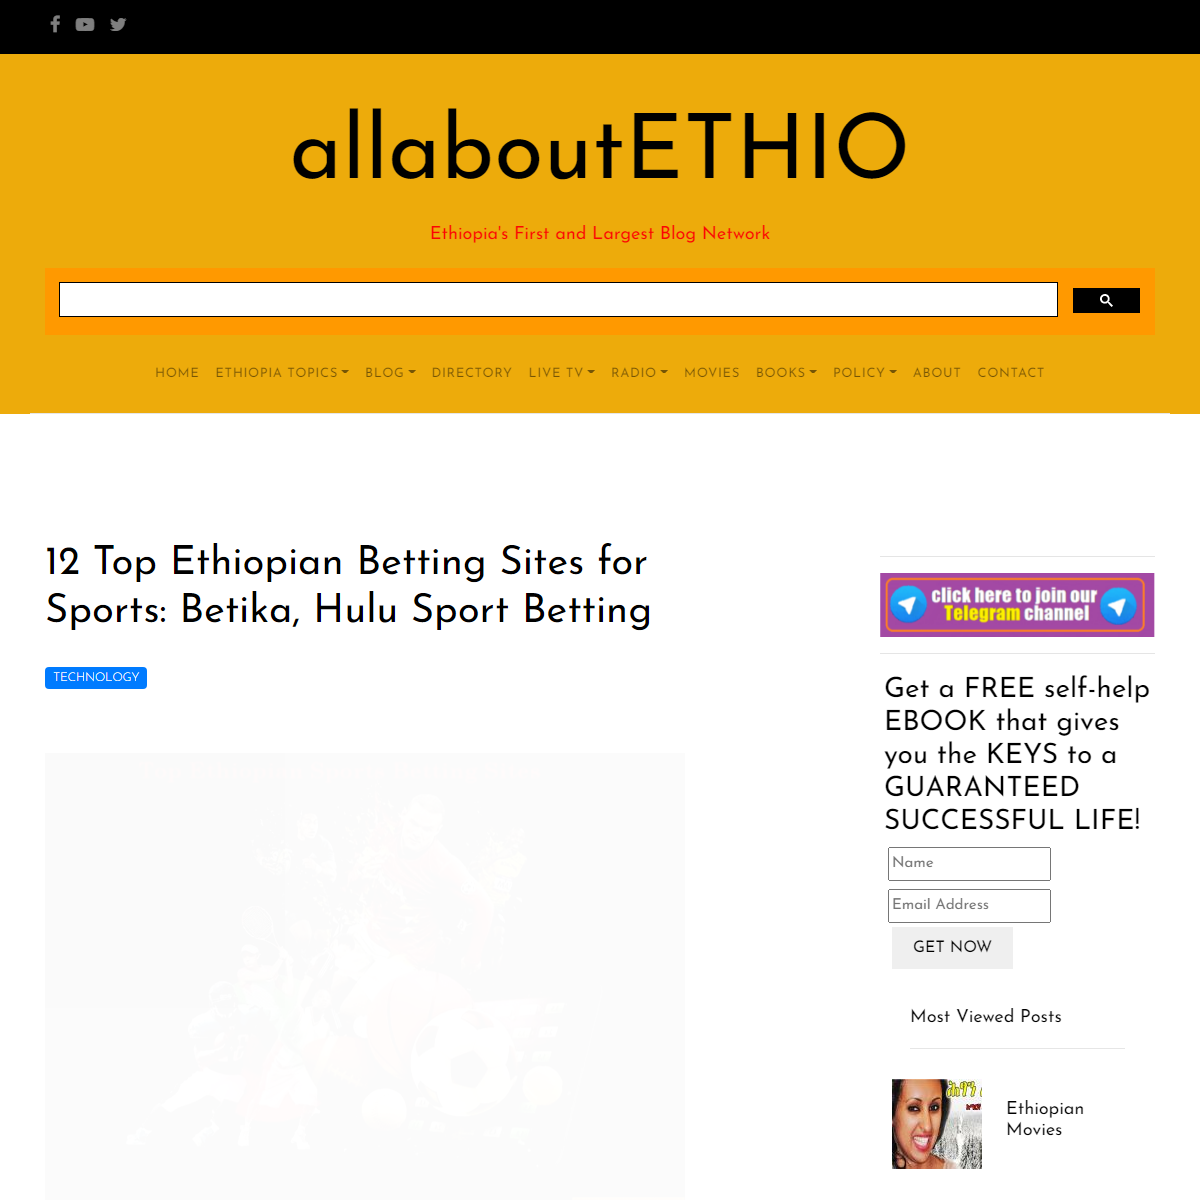 A complete backup of https://allaboutethio.com/12-top-ethiopian-betting-sites-for-sports-betika-hulu-sport.html